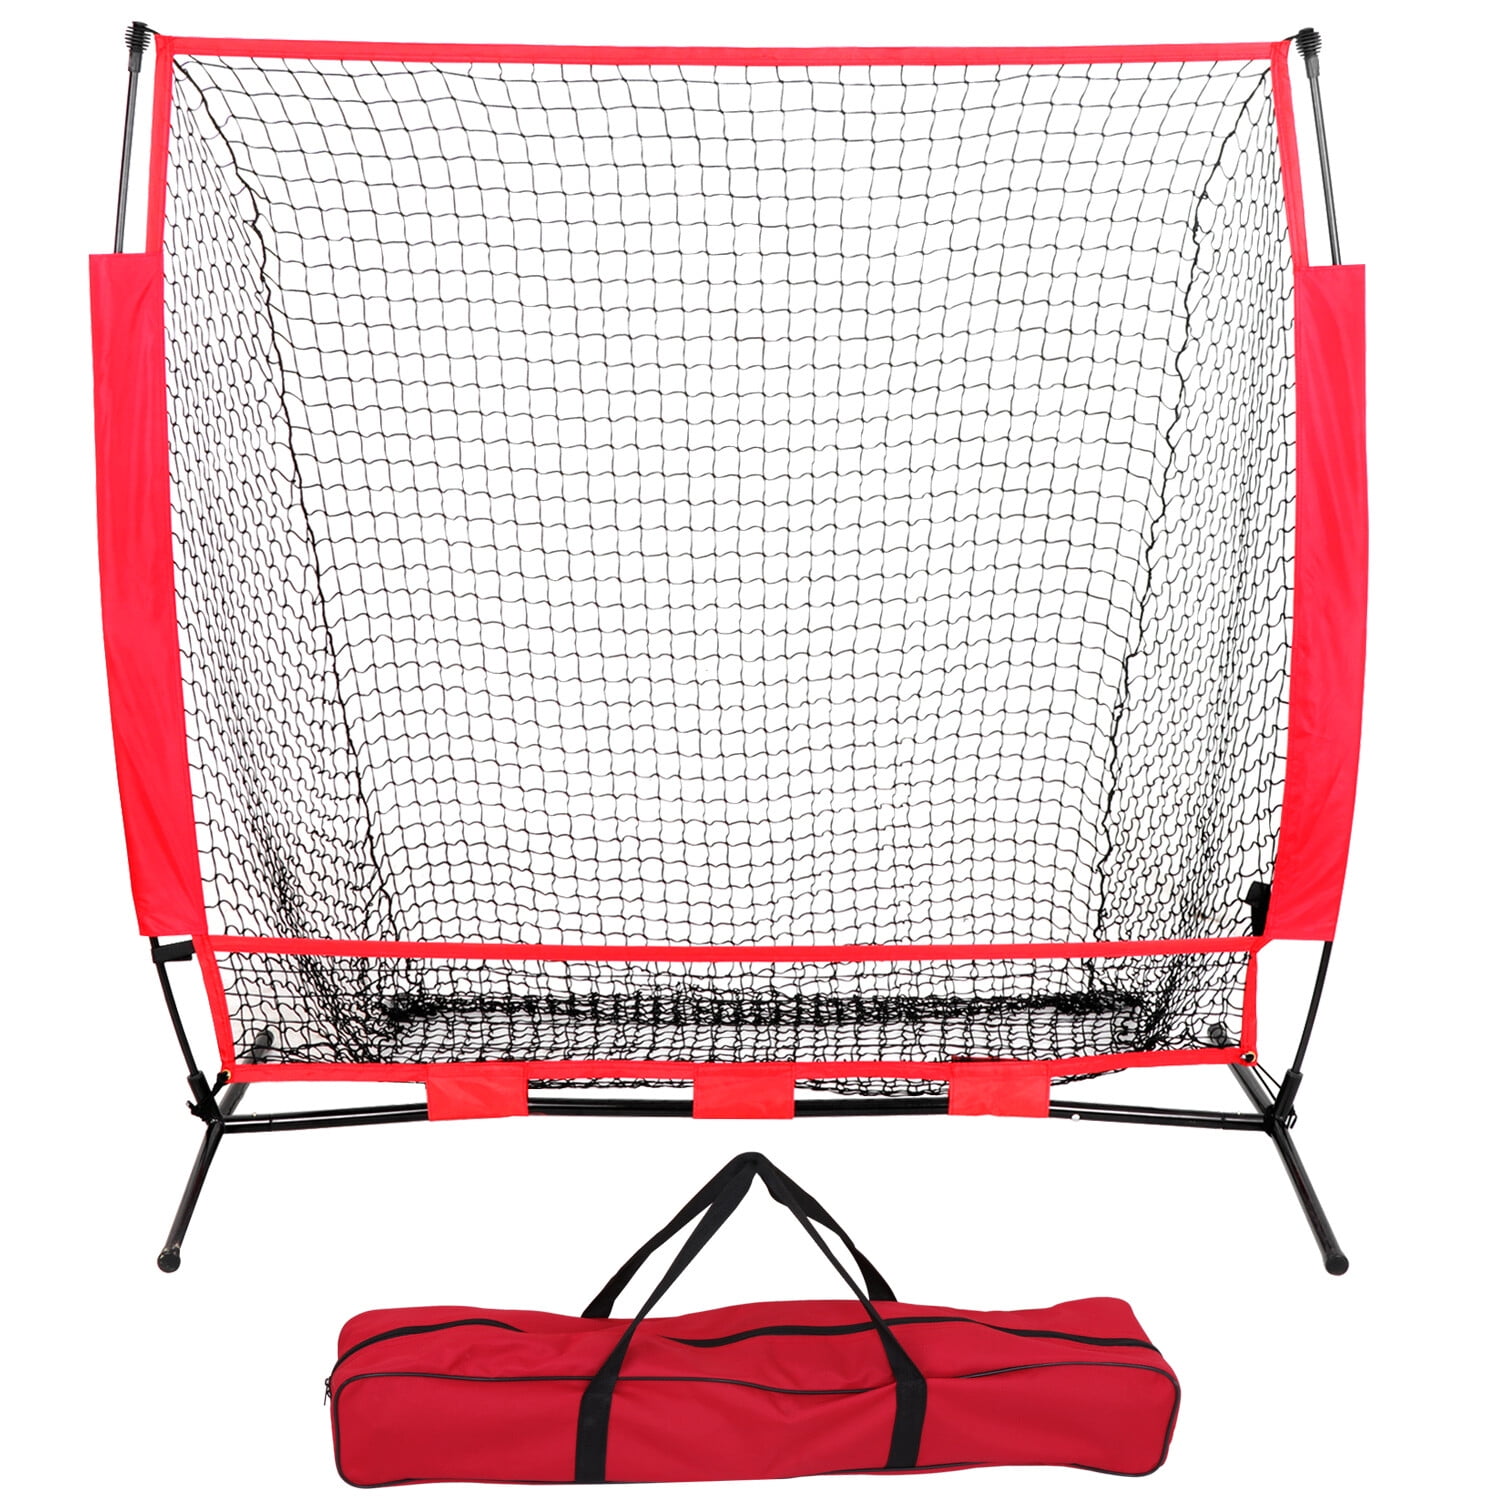 ZenStyle Portable 5 Ft. x 5 Ft. Baseball Softball Practice Net Hitting  Pitching Batting Training Net with Carry Bag